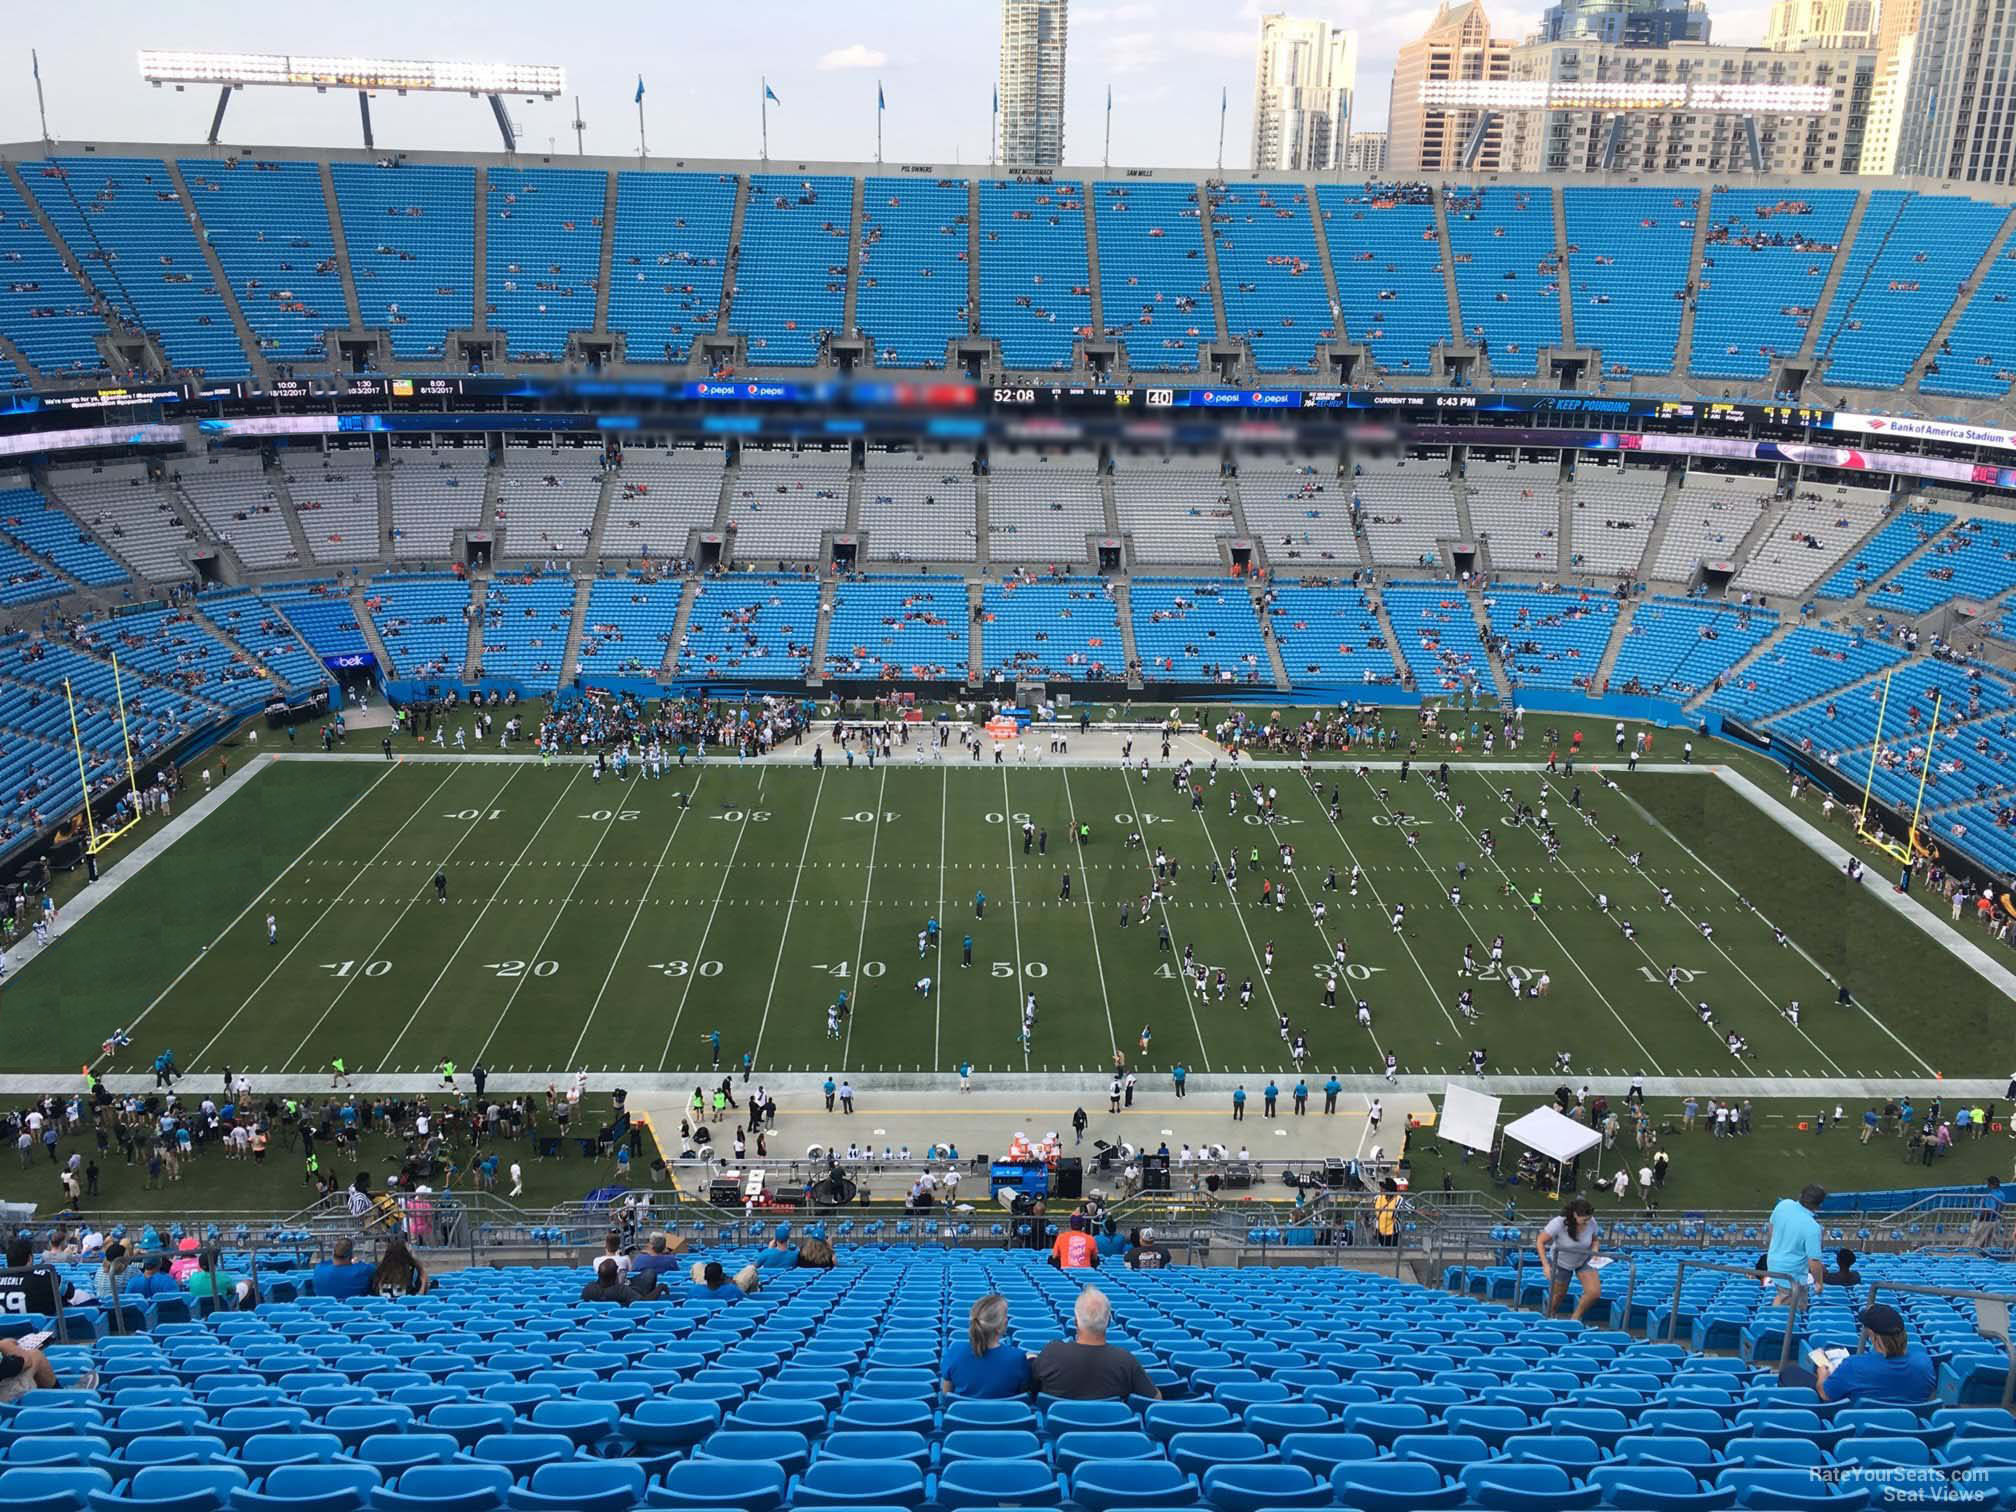 section 542, row 29 seat view  for football - bank of america stadium